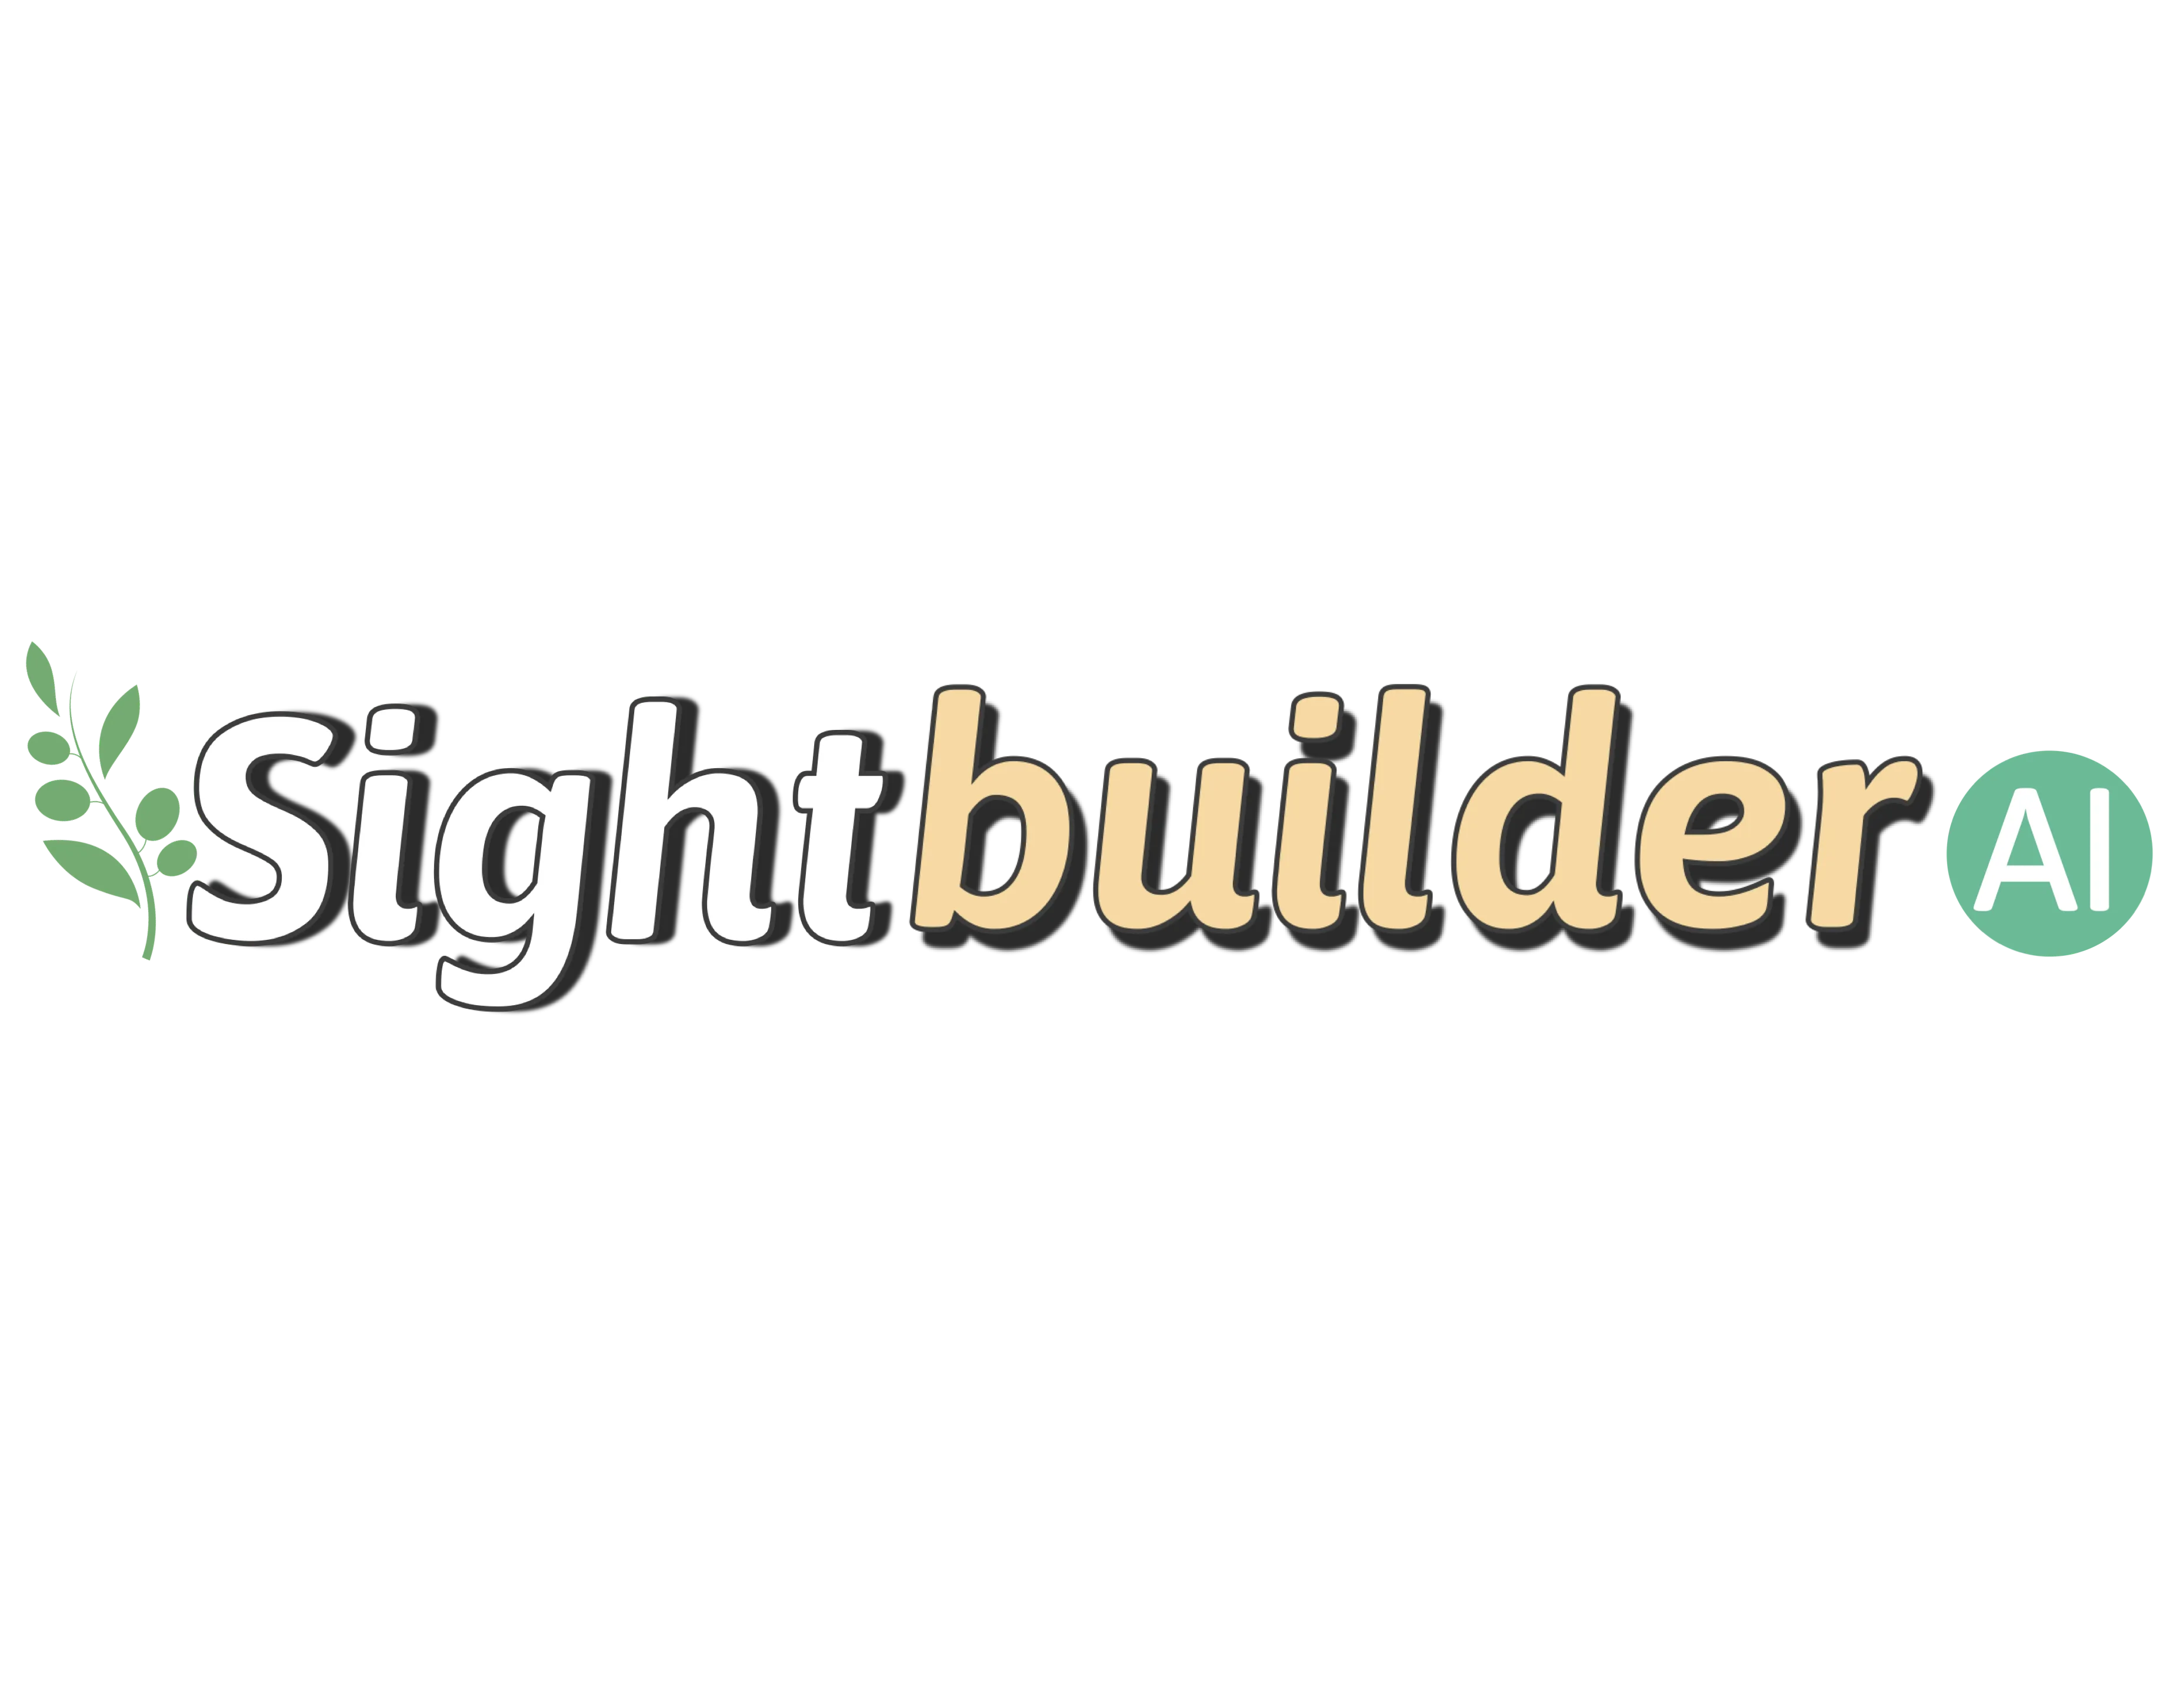 SightbuilderAi Logo with White Letters for Sight and Yellow Letters for Builder and green  for AI